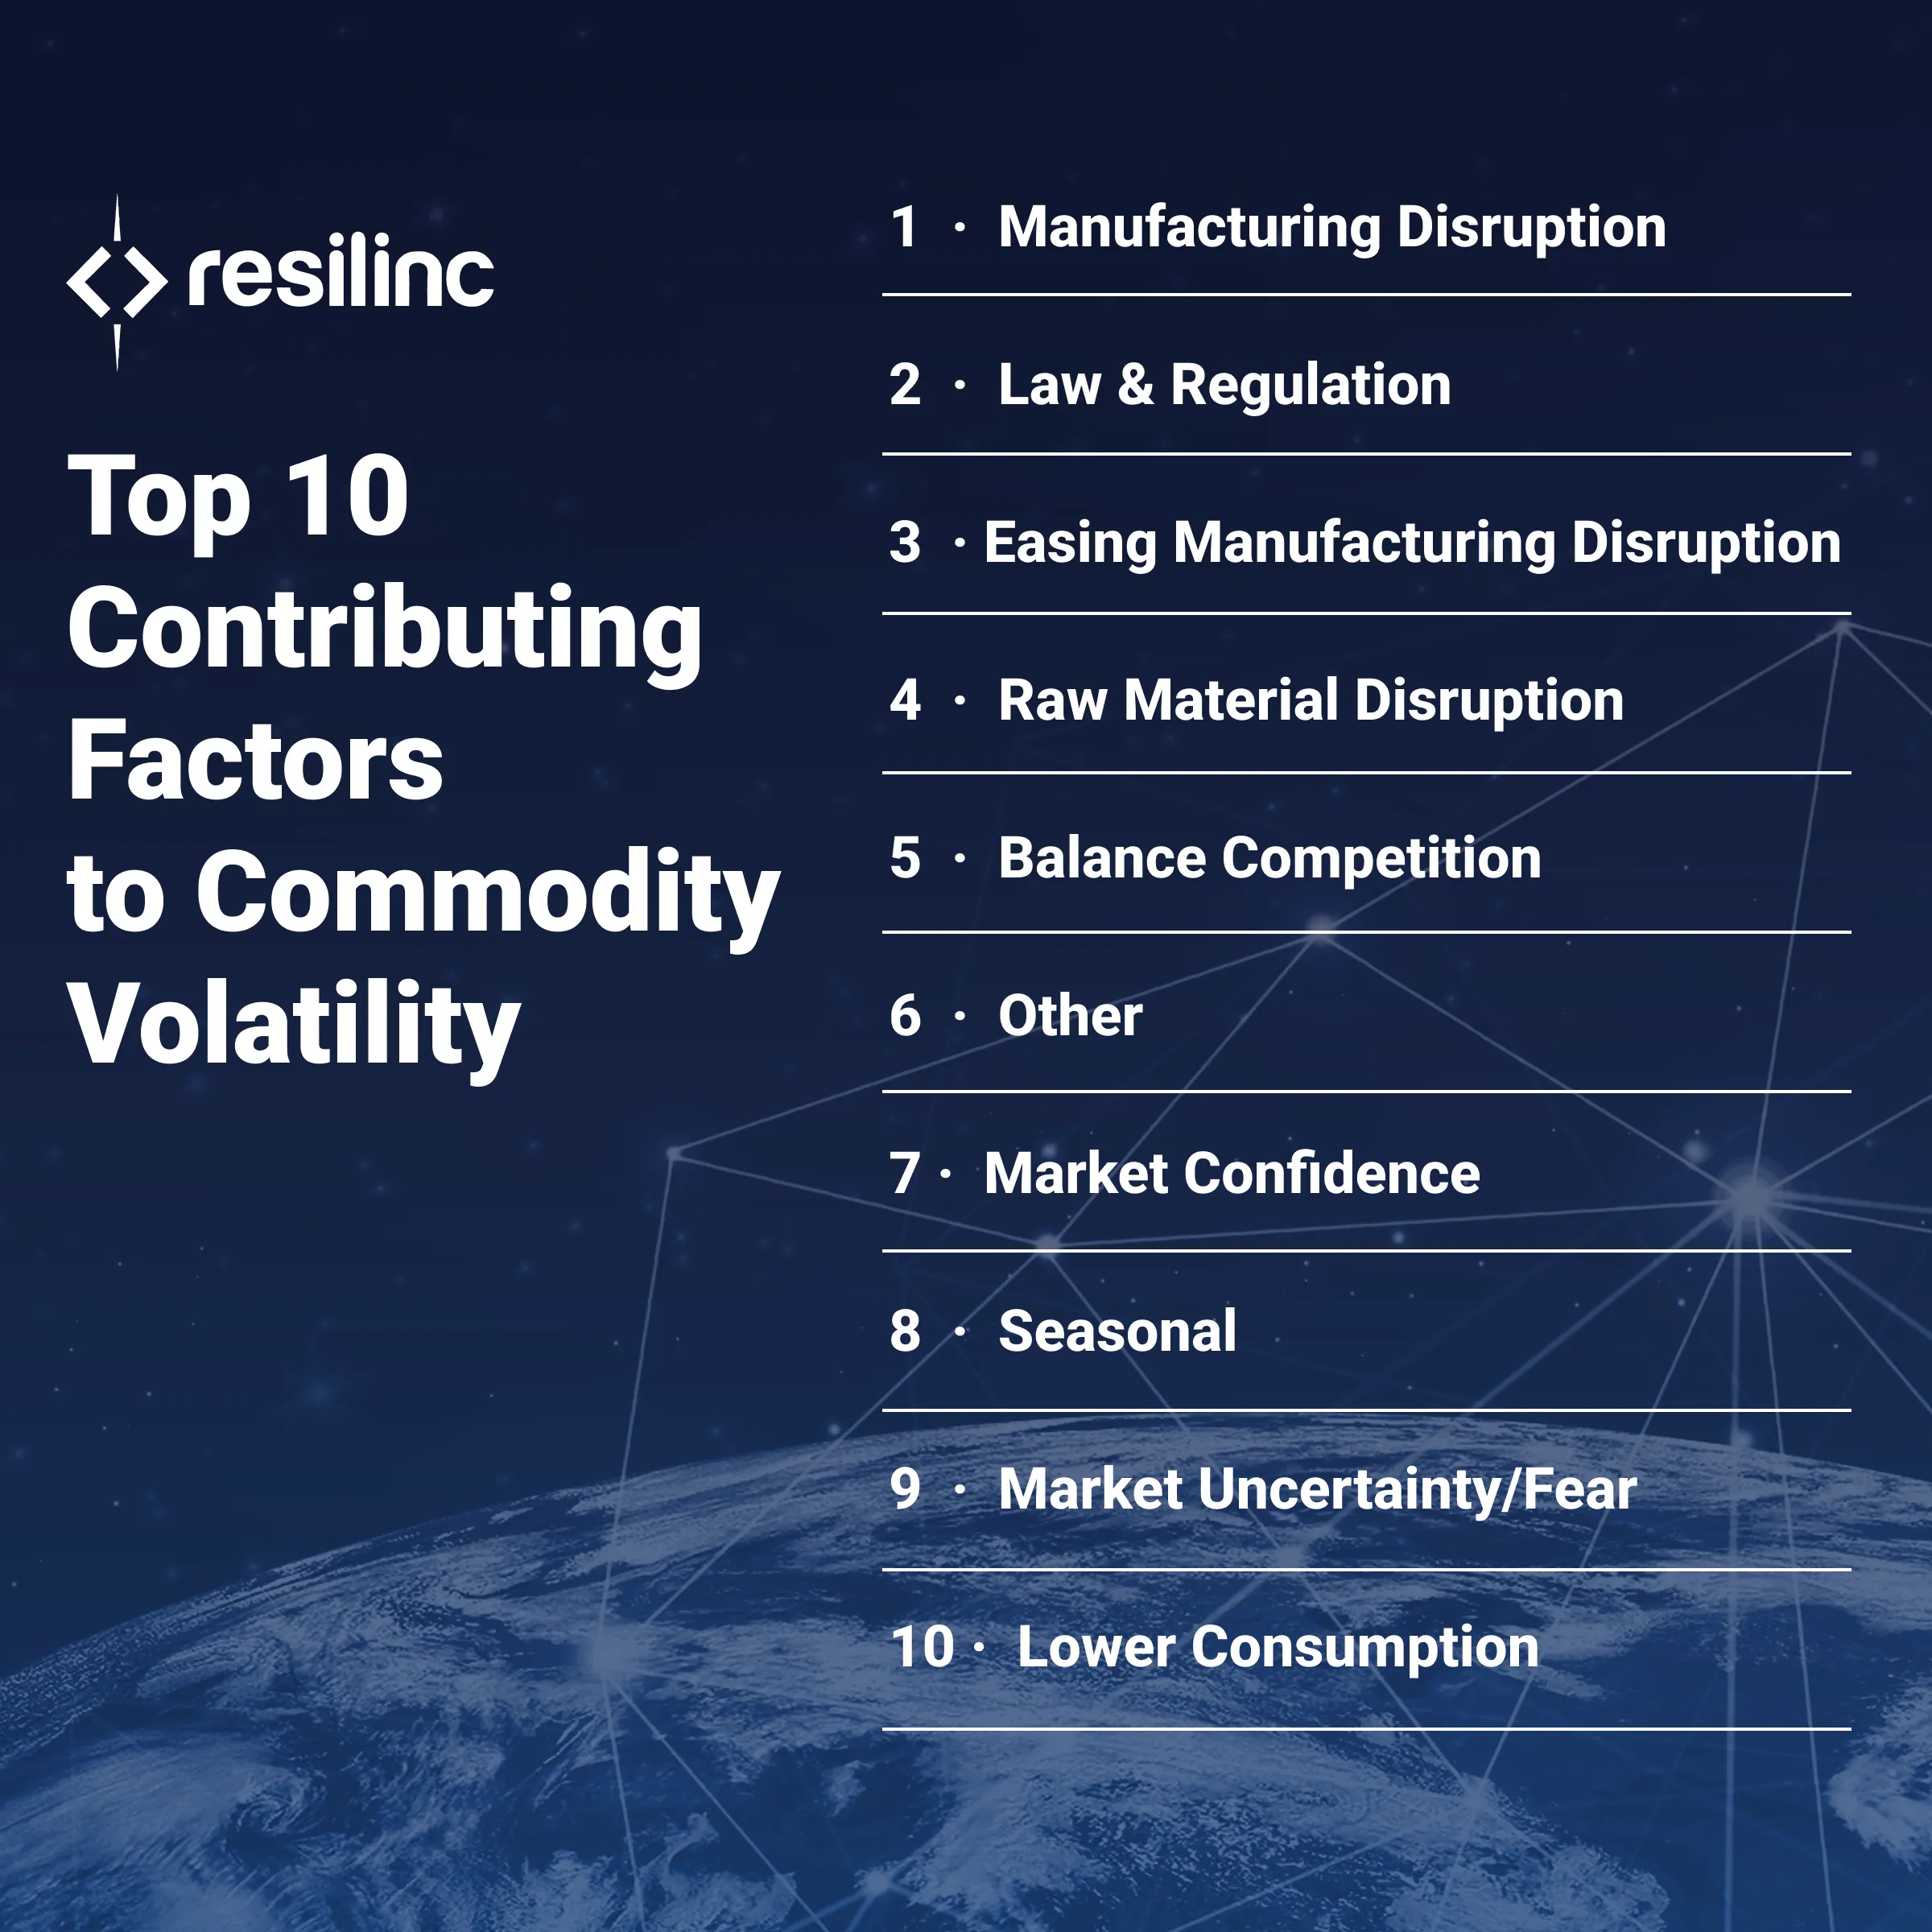 The top 10 contributing factors to commodity volatility. 1. Manufacturing disruptions. 2. Law and regulation. 3 easing manufacturing disruptions. 4 raw material distributions. 5 balance competition. 6 other 7 market confident 8 seasonal 9 market uncertainty/fear 10 lower consumption